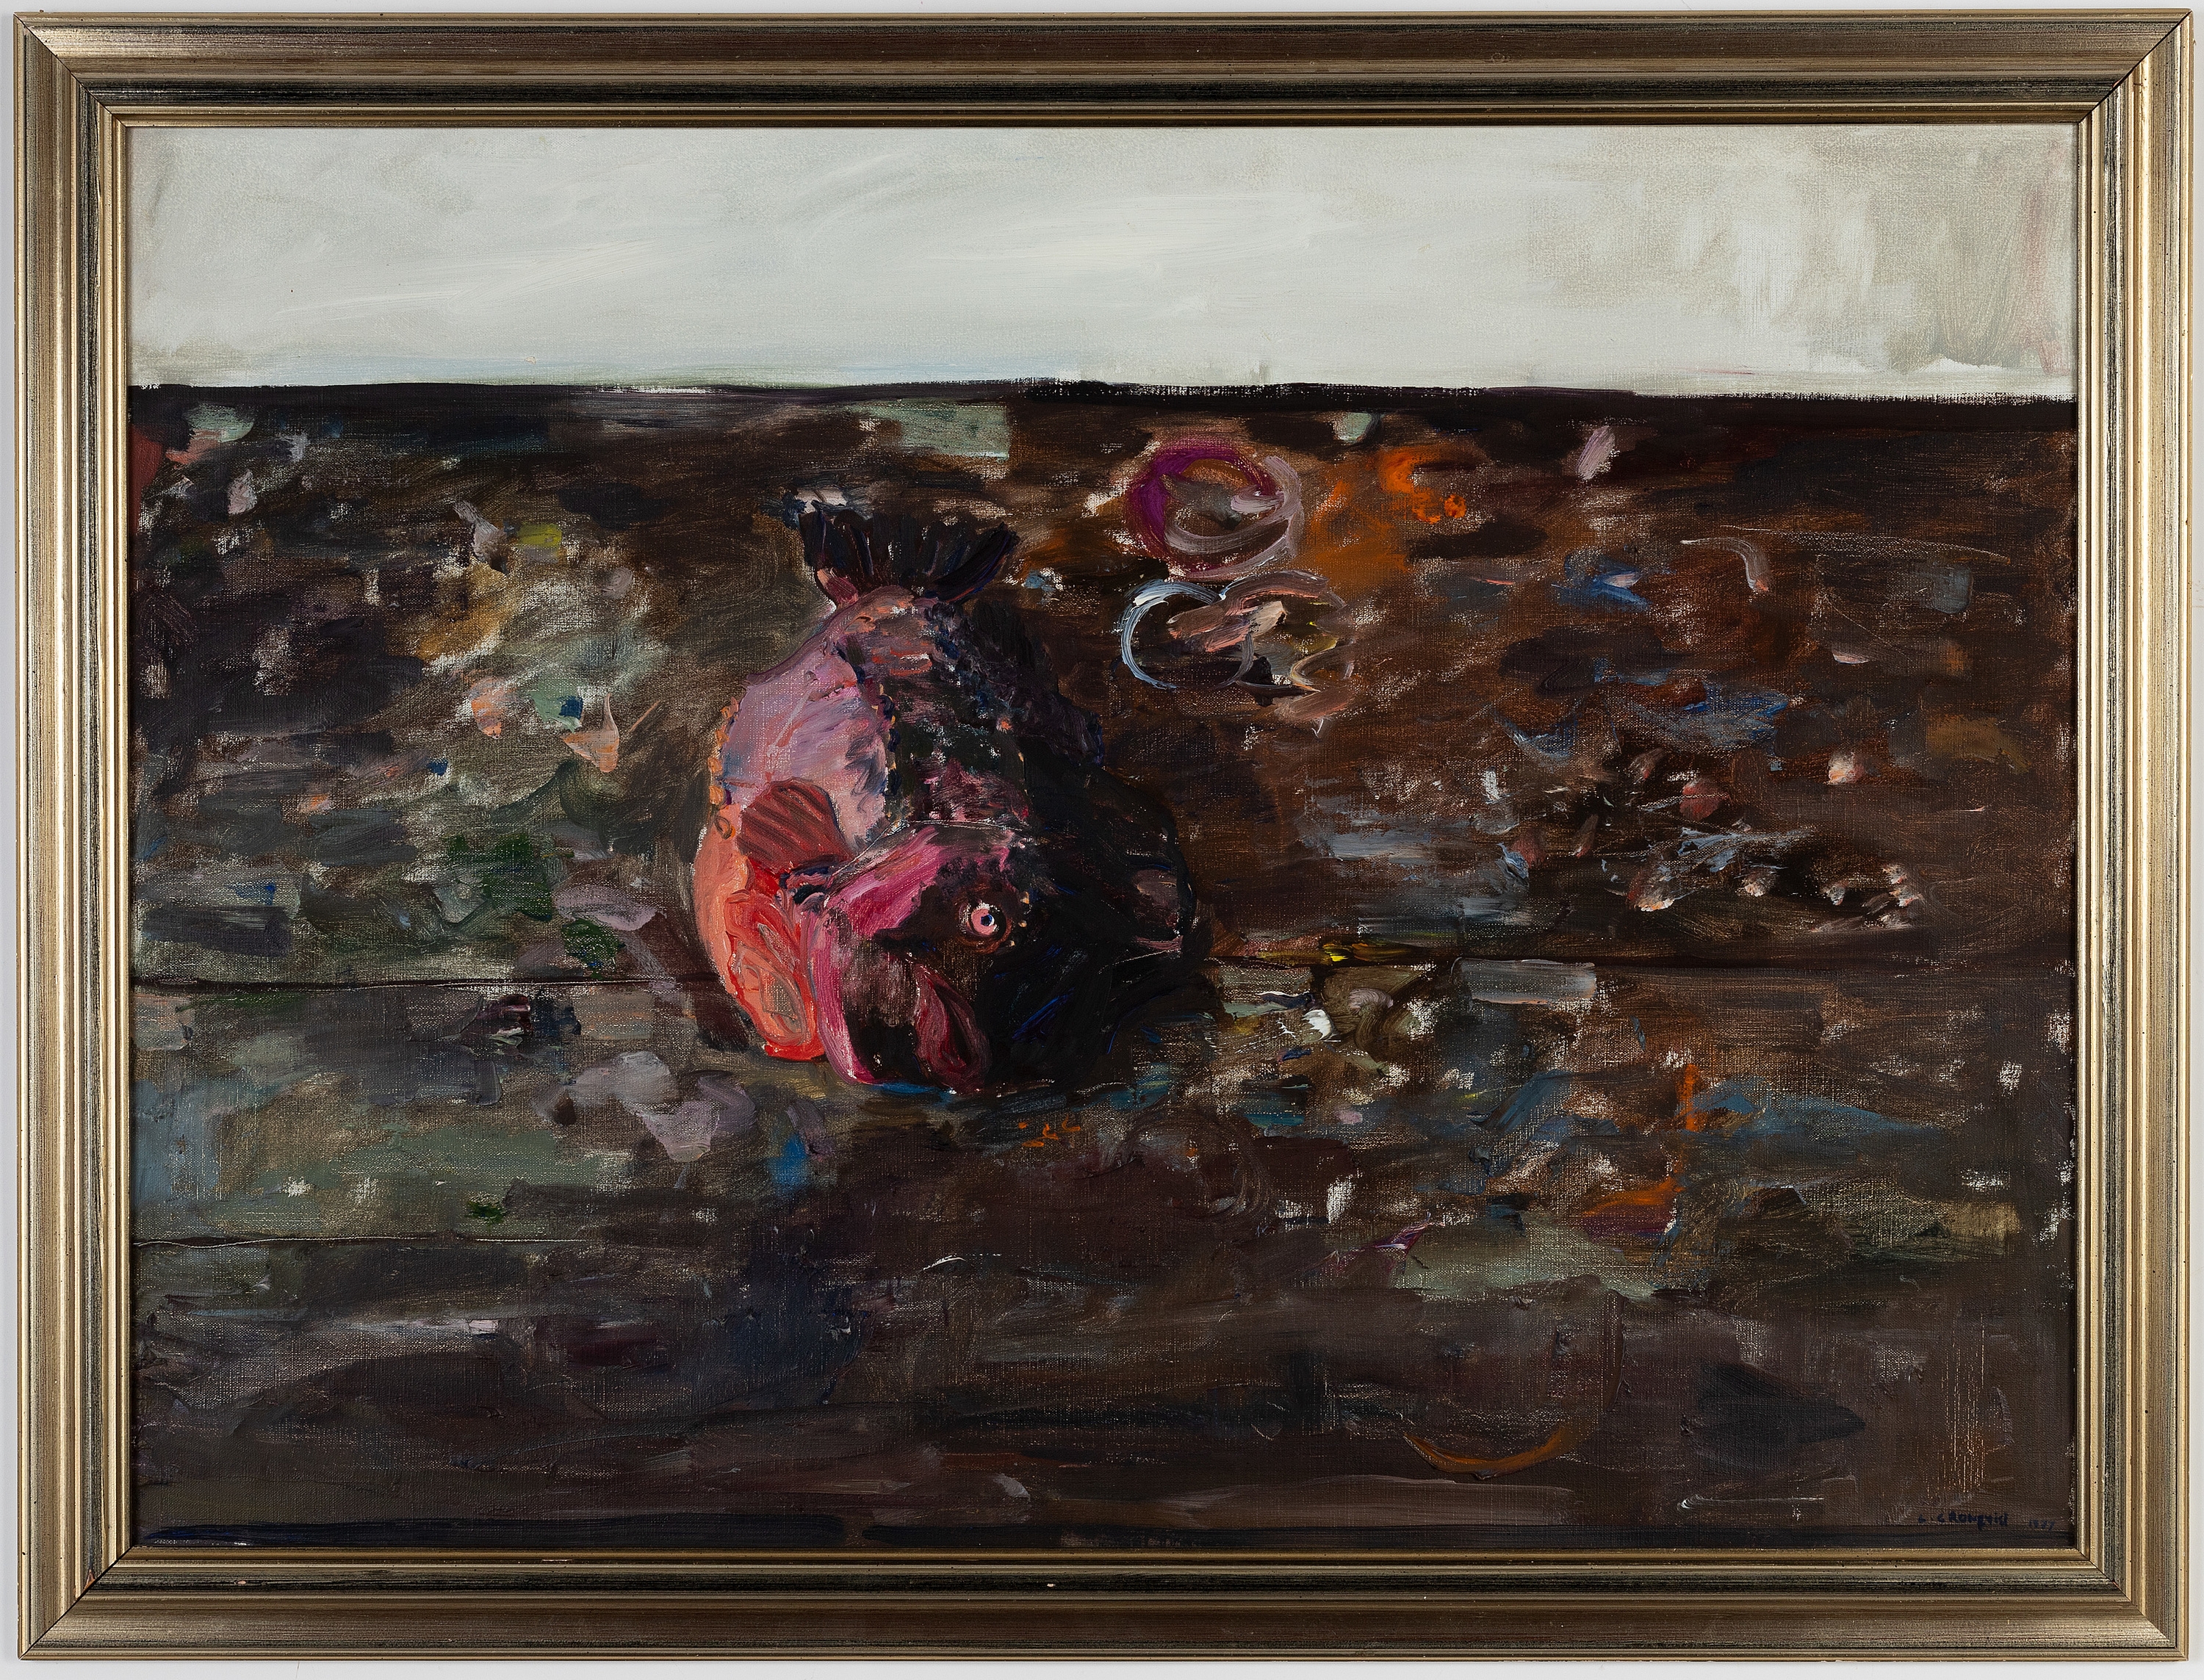 Lena Cronqvist, oil on canvas, signed and dated 1977. by Lena Cronqvist, dated 1977